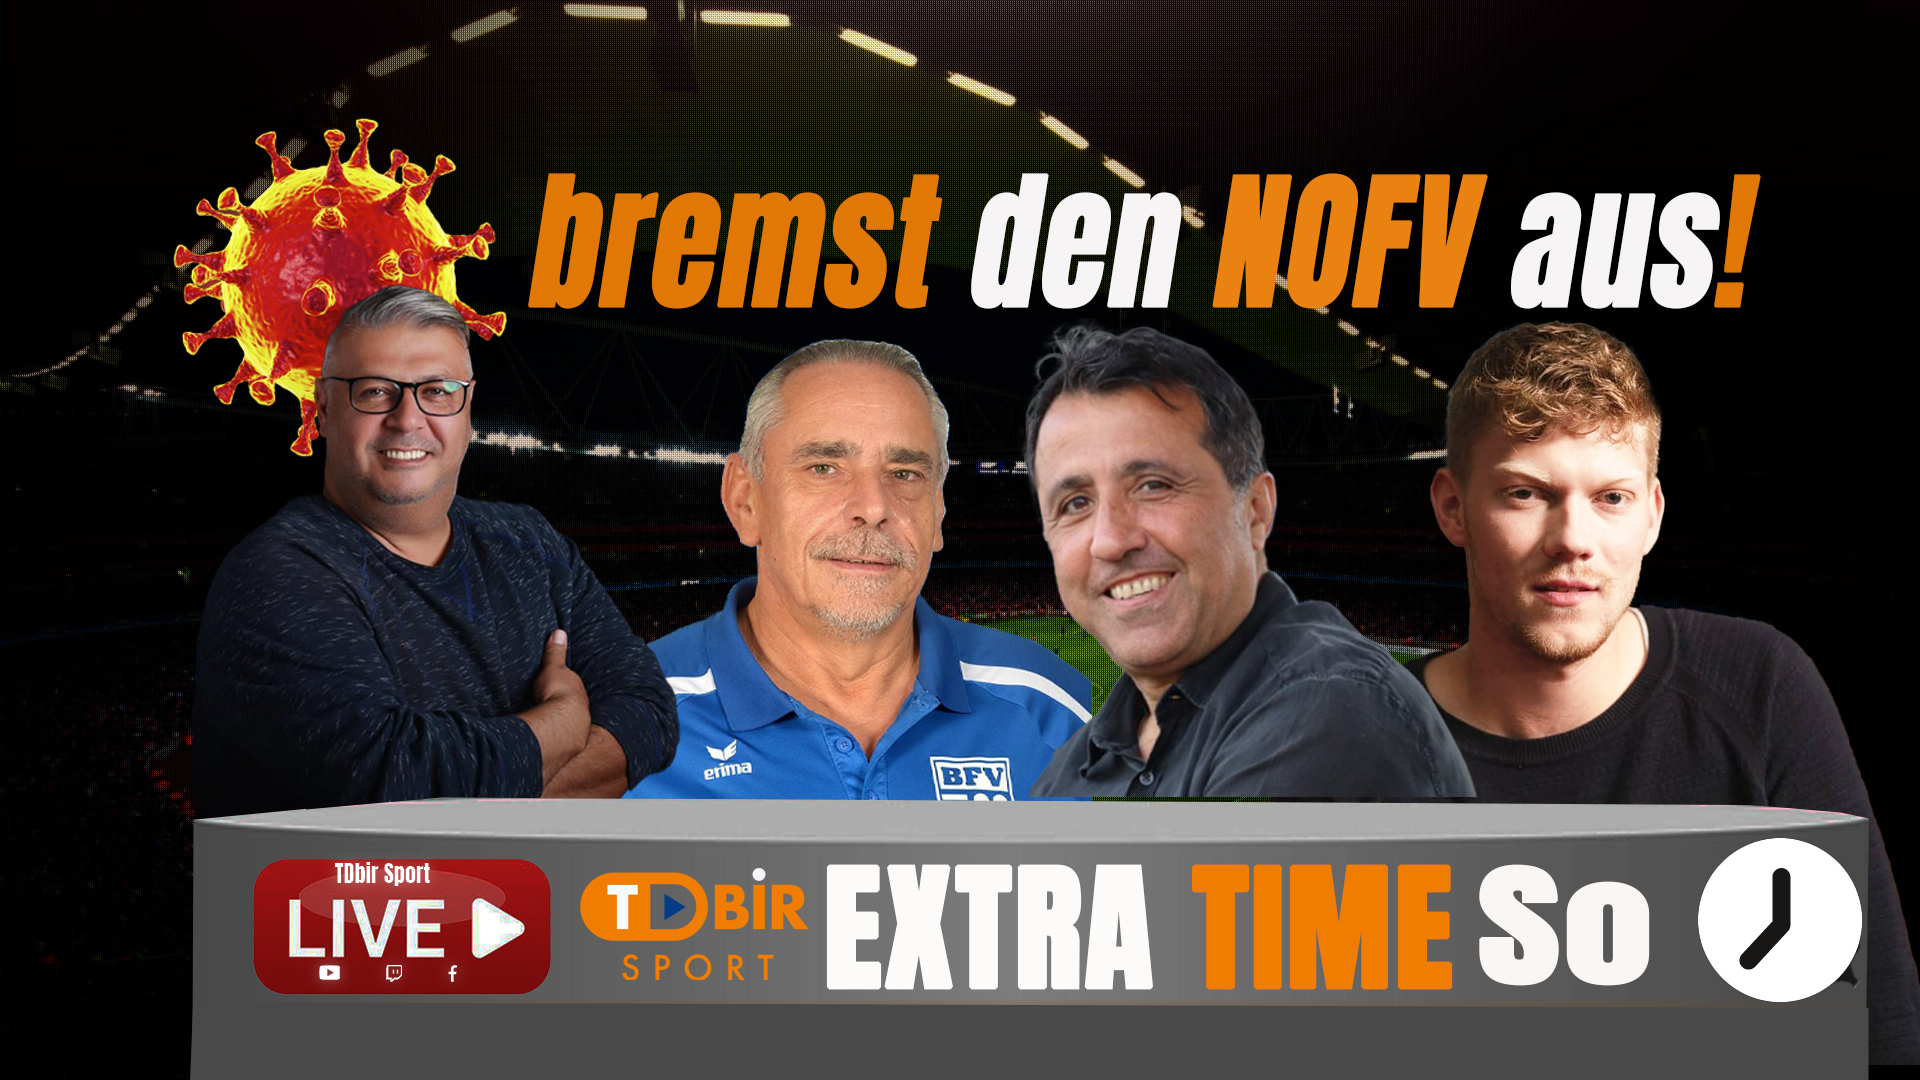 You are currently viewing 19 Uhr live bei You Tube: Corona bremst den NOFV aus